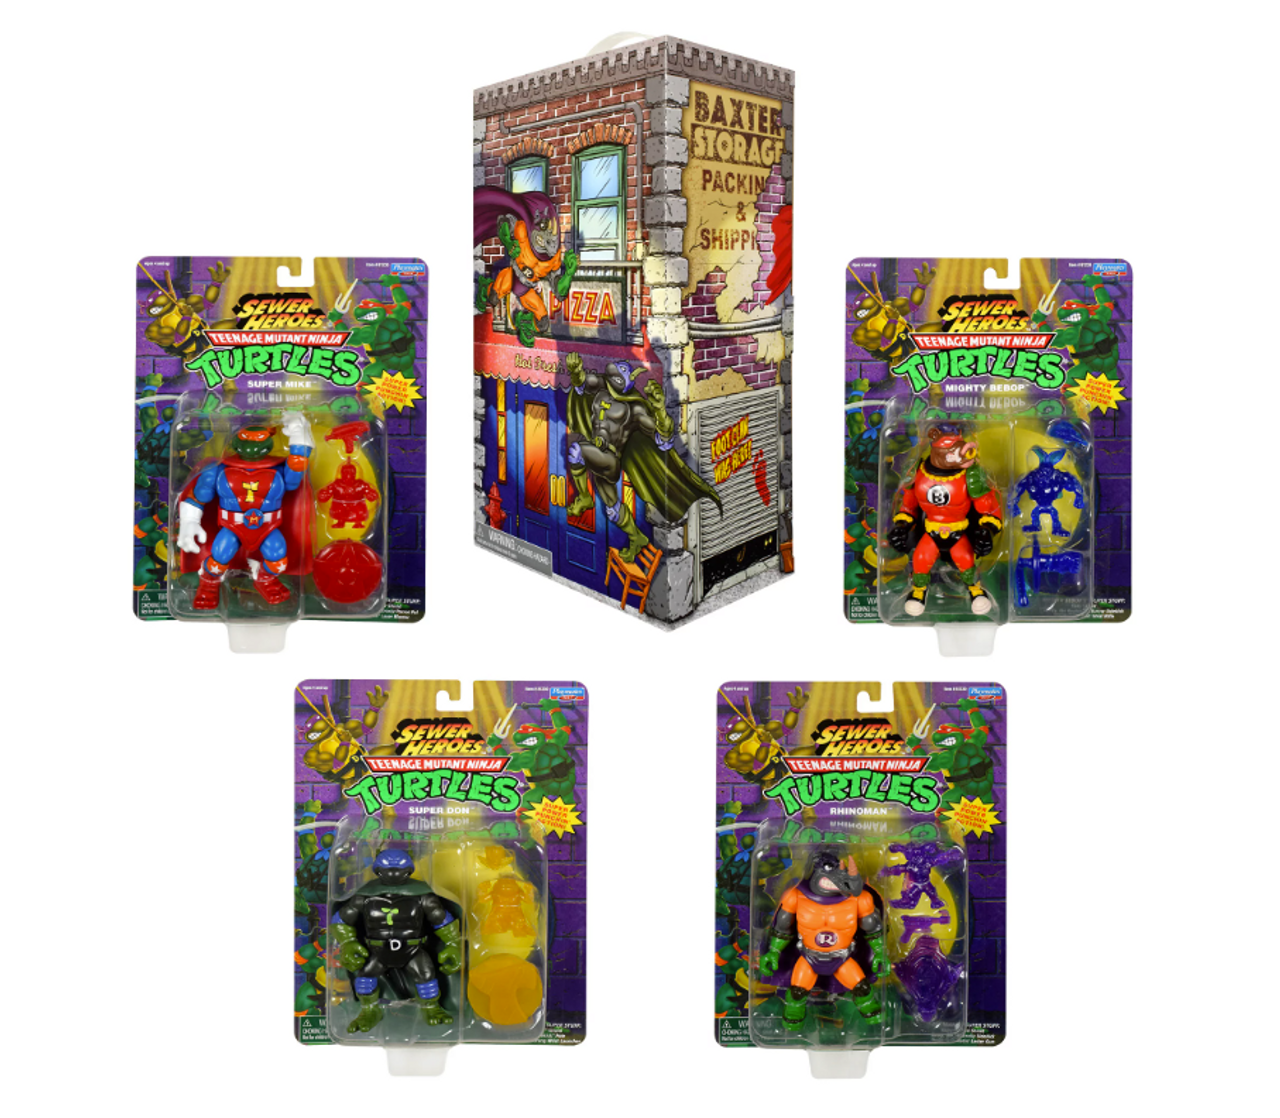 https://cdn11.bigcommerce.com/s-lyvo1qtroi/images/stencil/1280x1280/products/79338/209288/Teenage_Mutant_Ninja_Turtles__Sewer_Heroes_4-Figure_Bundle_with_Accessories_-_Walmart.com_-_Google_Chrome_1_5_2023_6_53_39_AM__62631.1672920031.png?c=2?imbypass=on